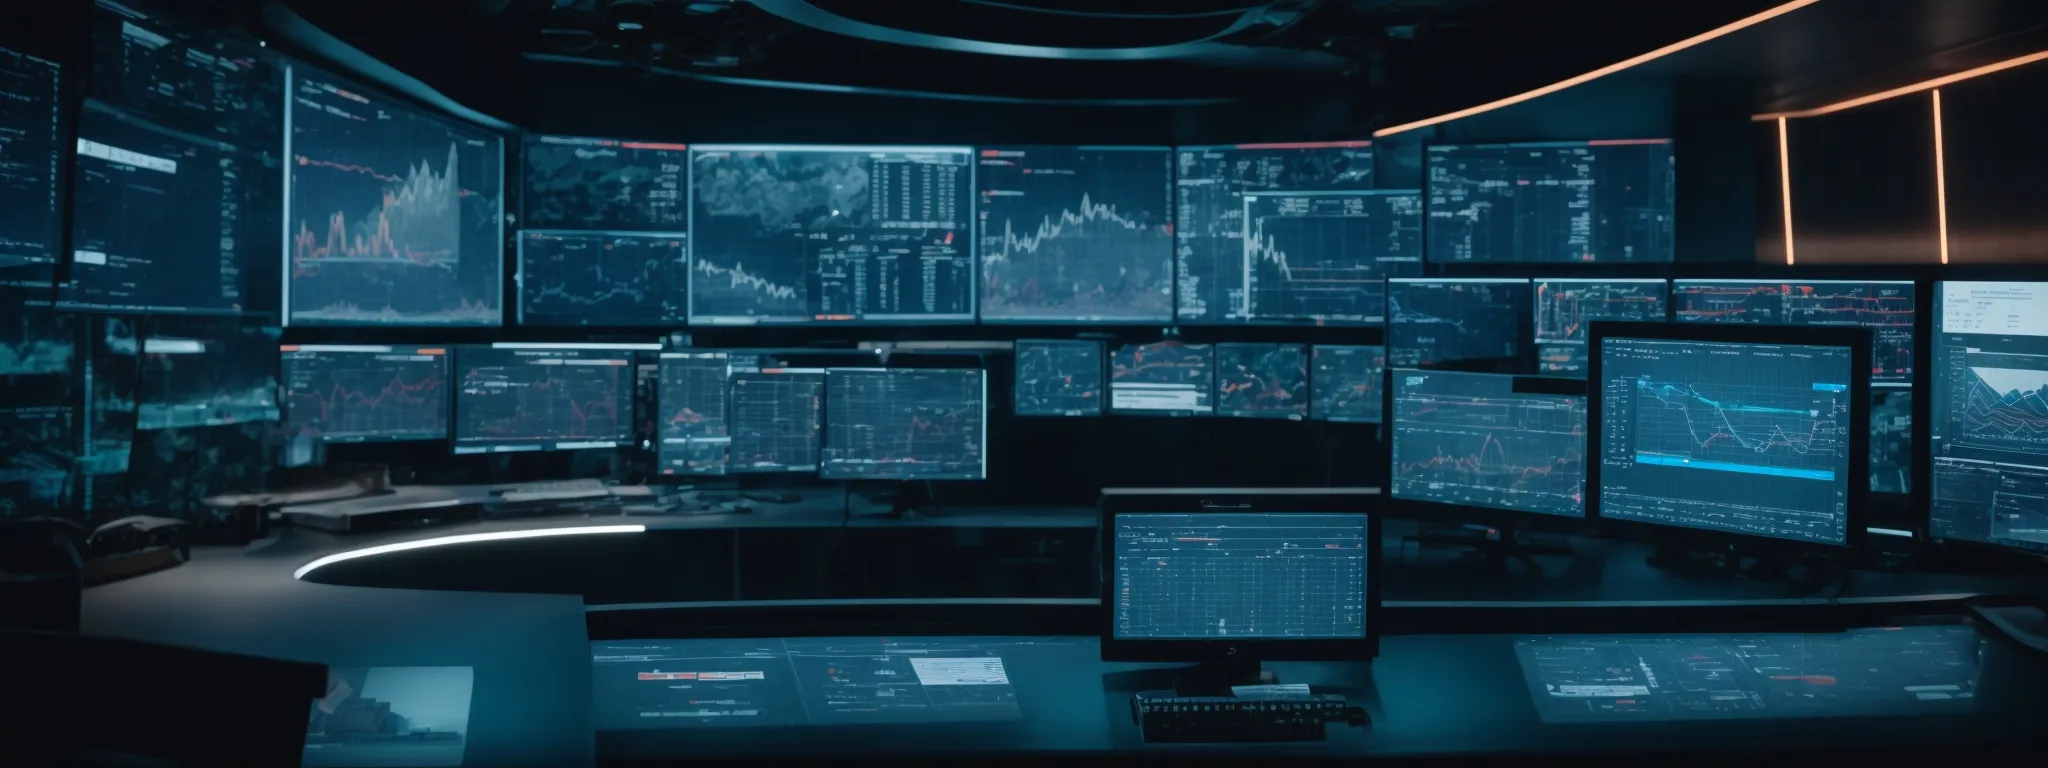 a futuristic command center with screens displaying various data analytics and graphs tracking search engine patterns.